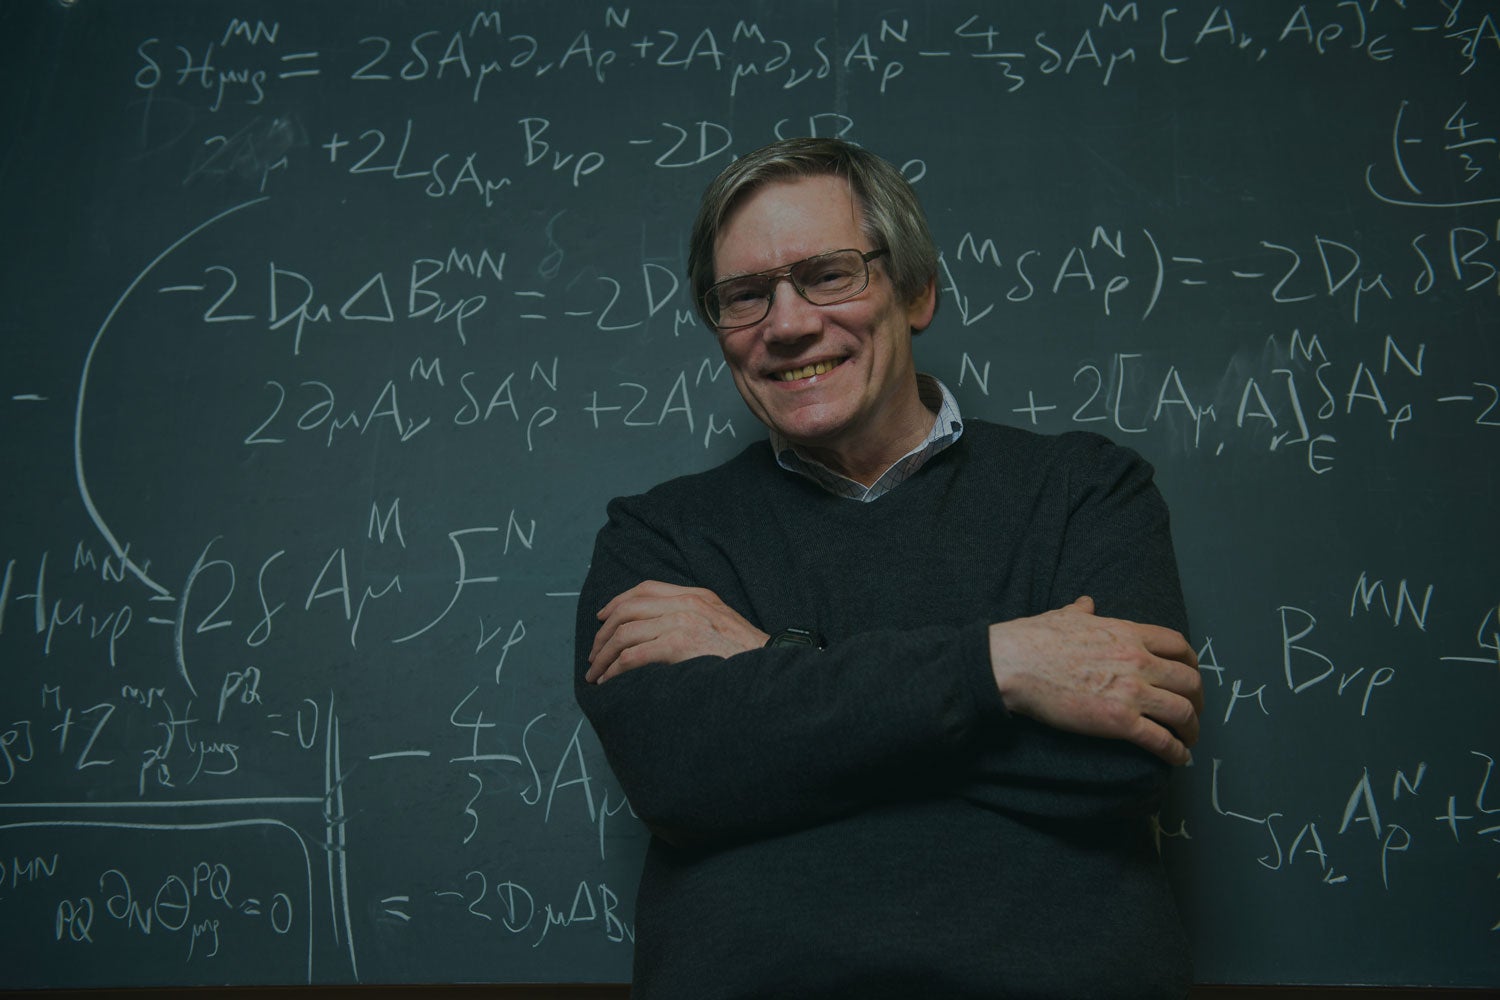 Dr. Alan Guth, a theoretical physicist and professor at Massachusetts Institute of Technology